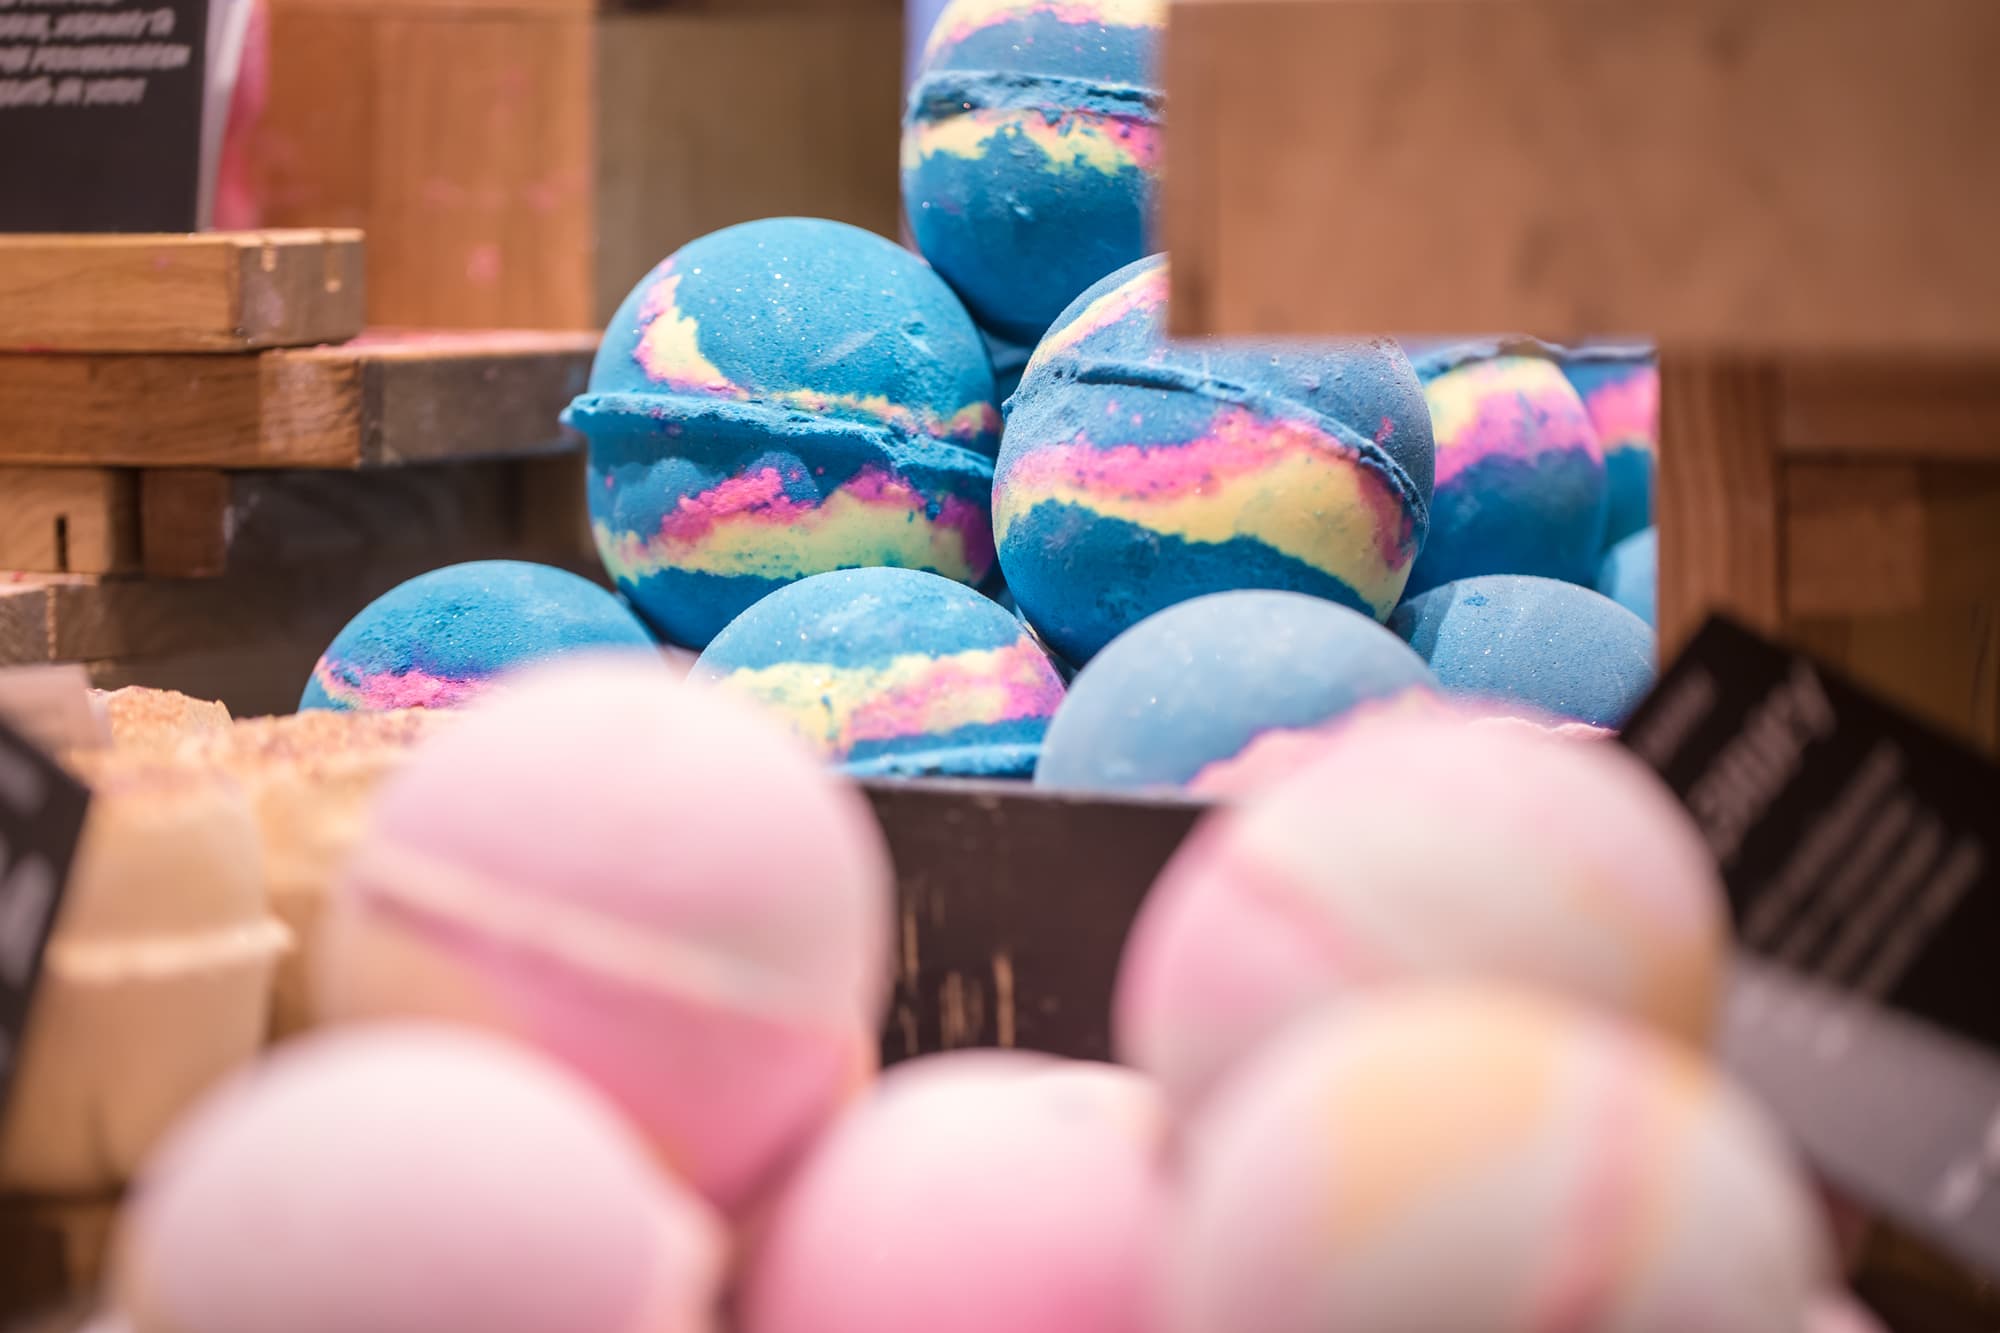 How To Prevent Lush Bath Bomb Stains